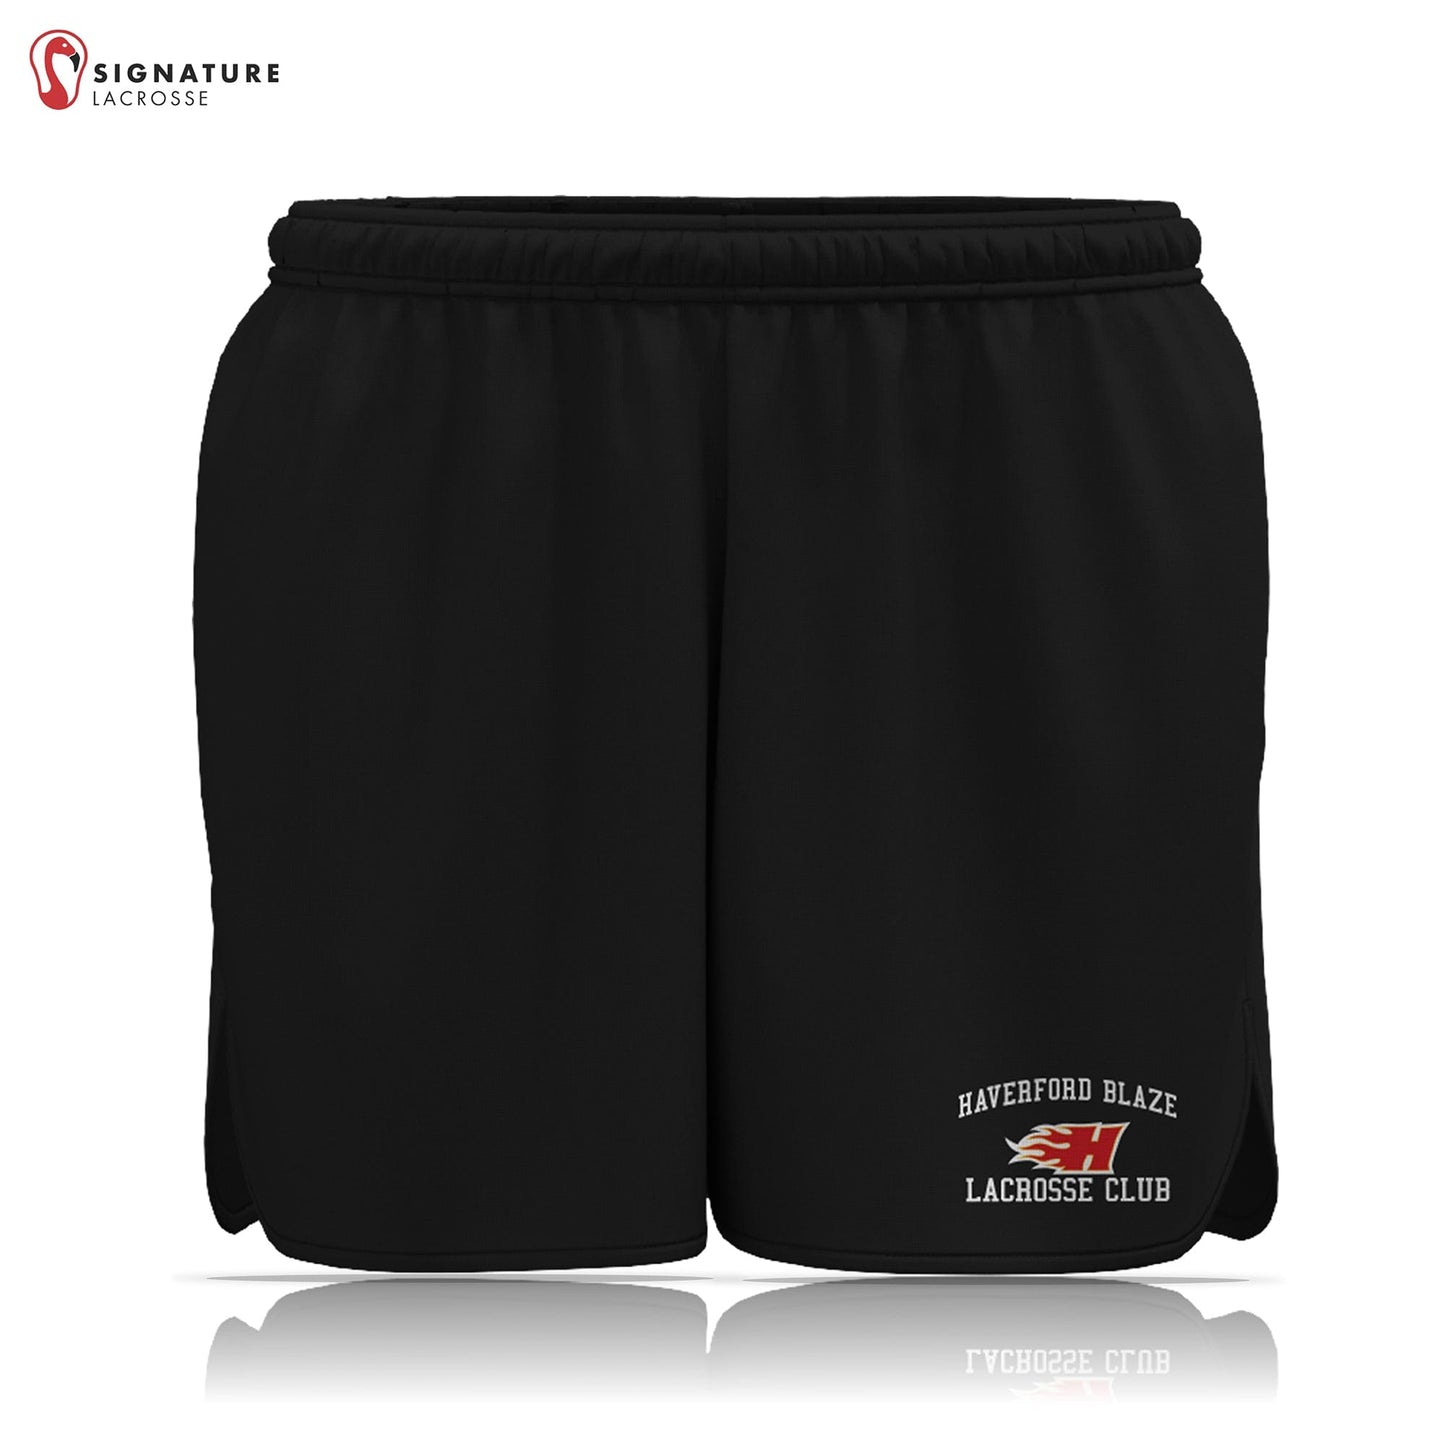 Haverford Blaze Lacrosse Women's Player Game Shorts: 7th/8th Grade Signature Lacrosse